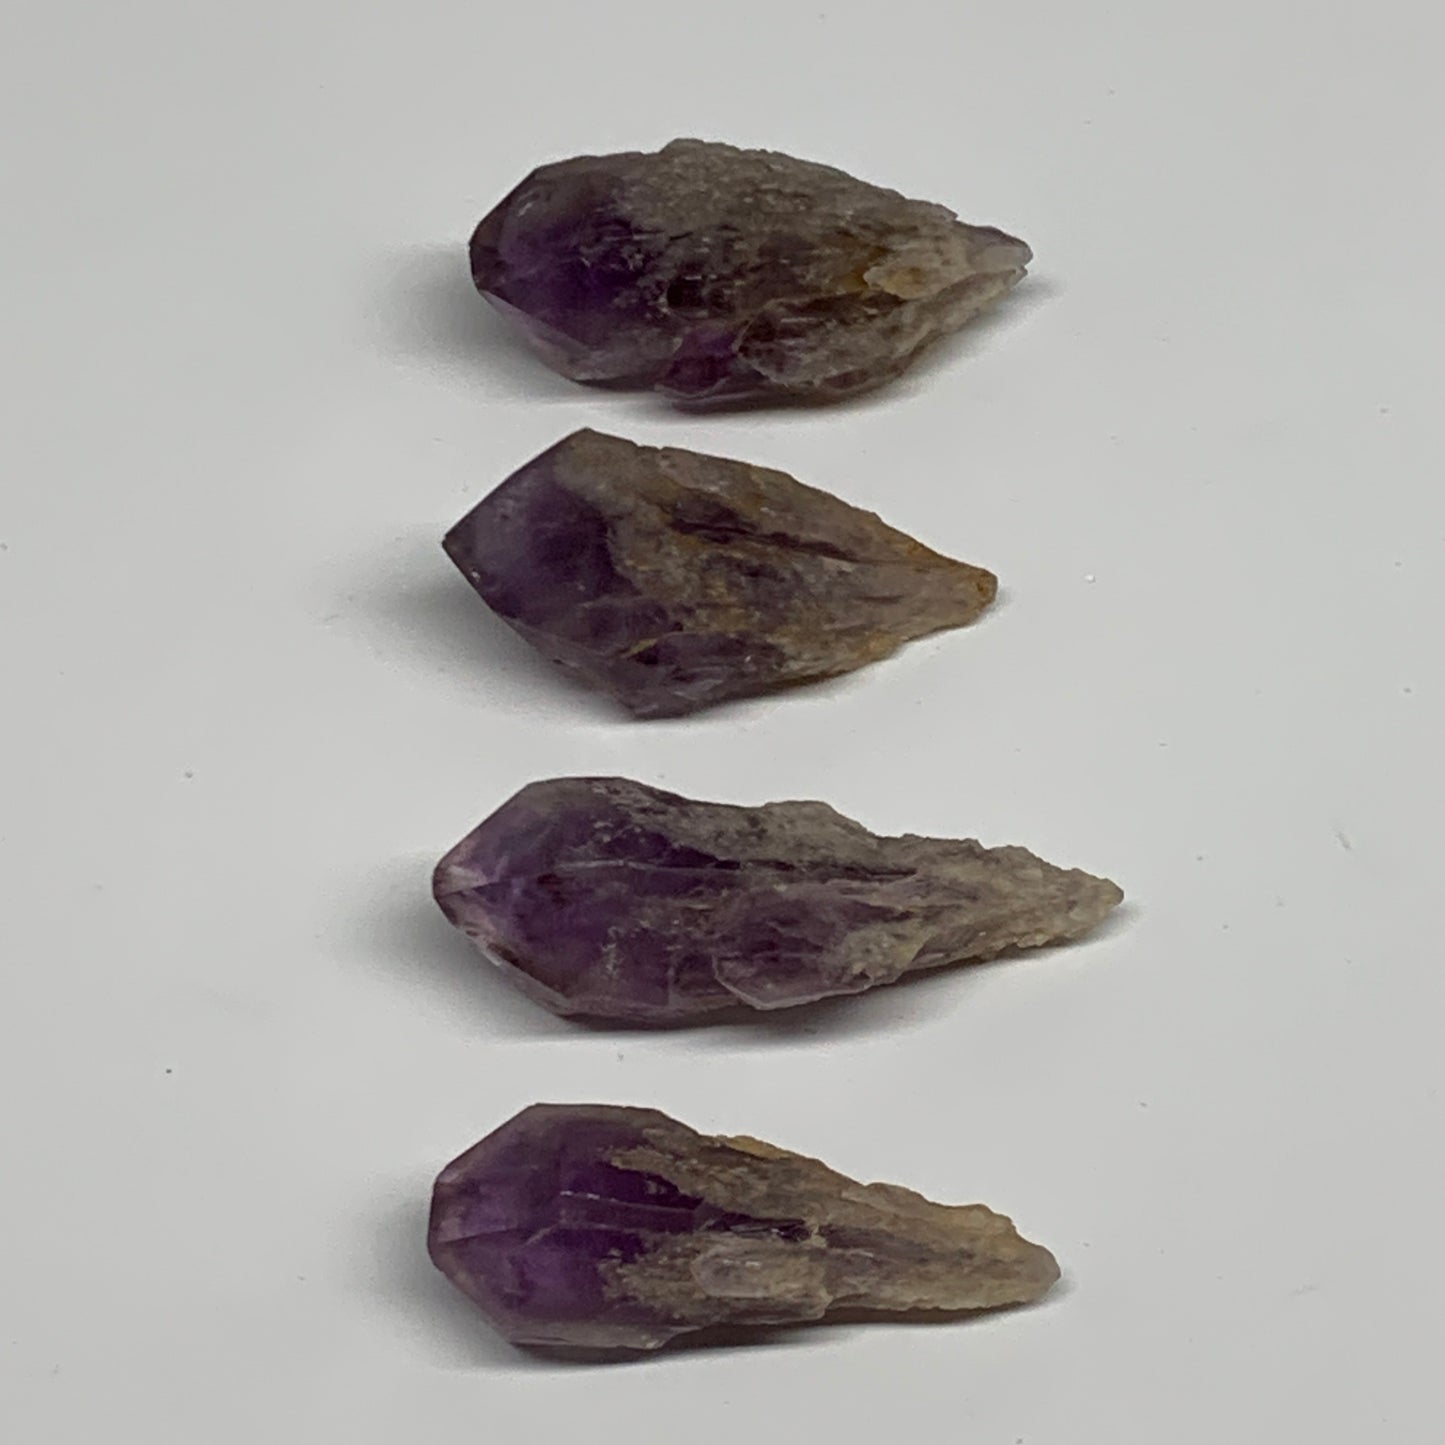 118.3g, 2.2" - 2.5", 4pcs, Amethyst Point Polished Rough lower part, B32394